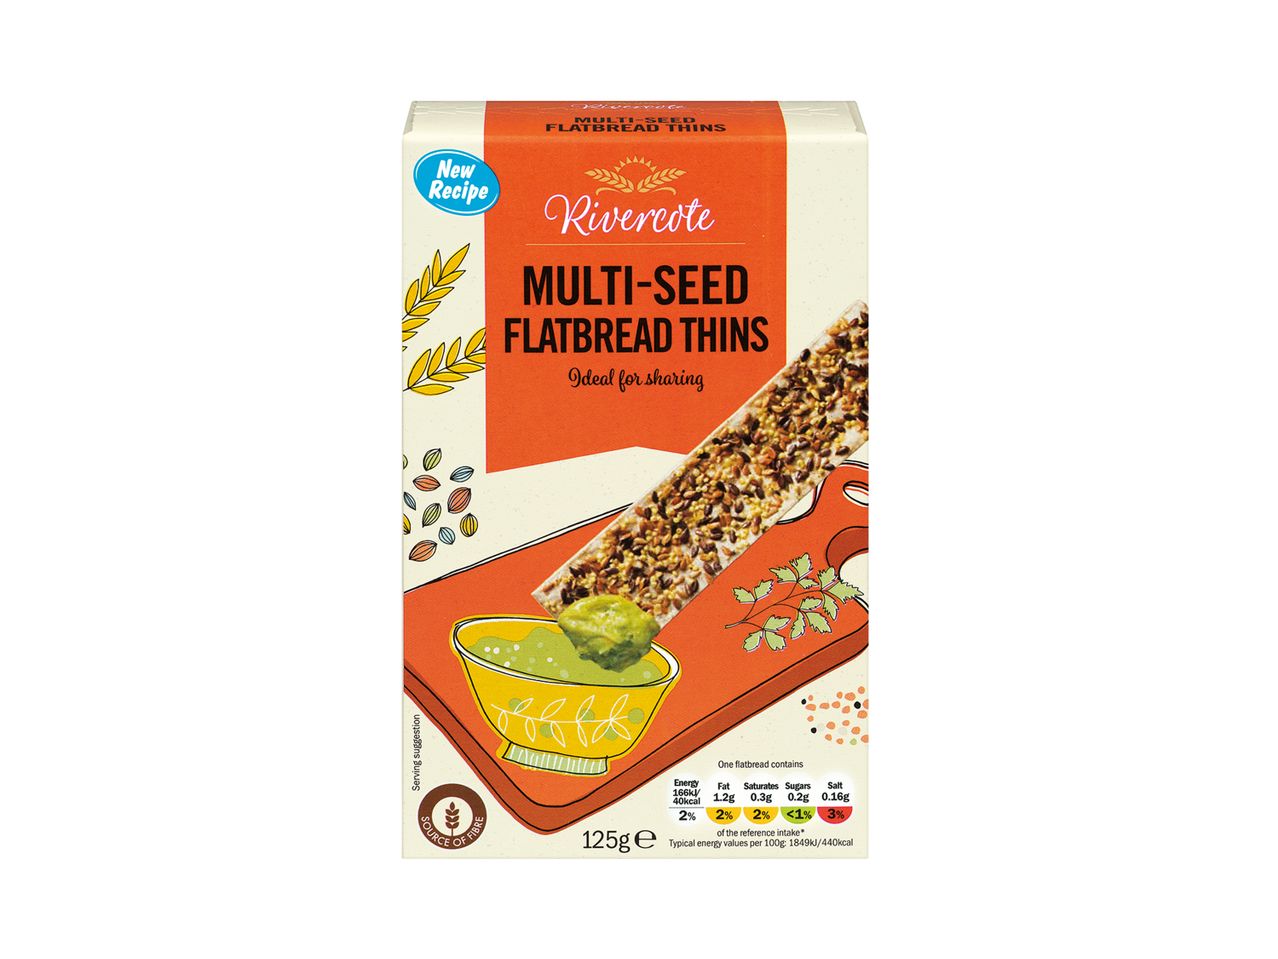 Go to full screen view: Rivercote Flatbread Thins - Image 1